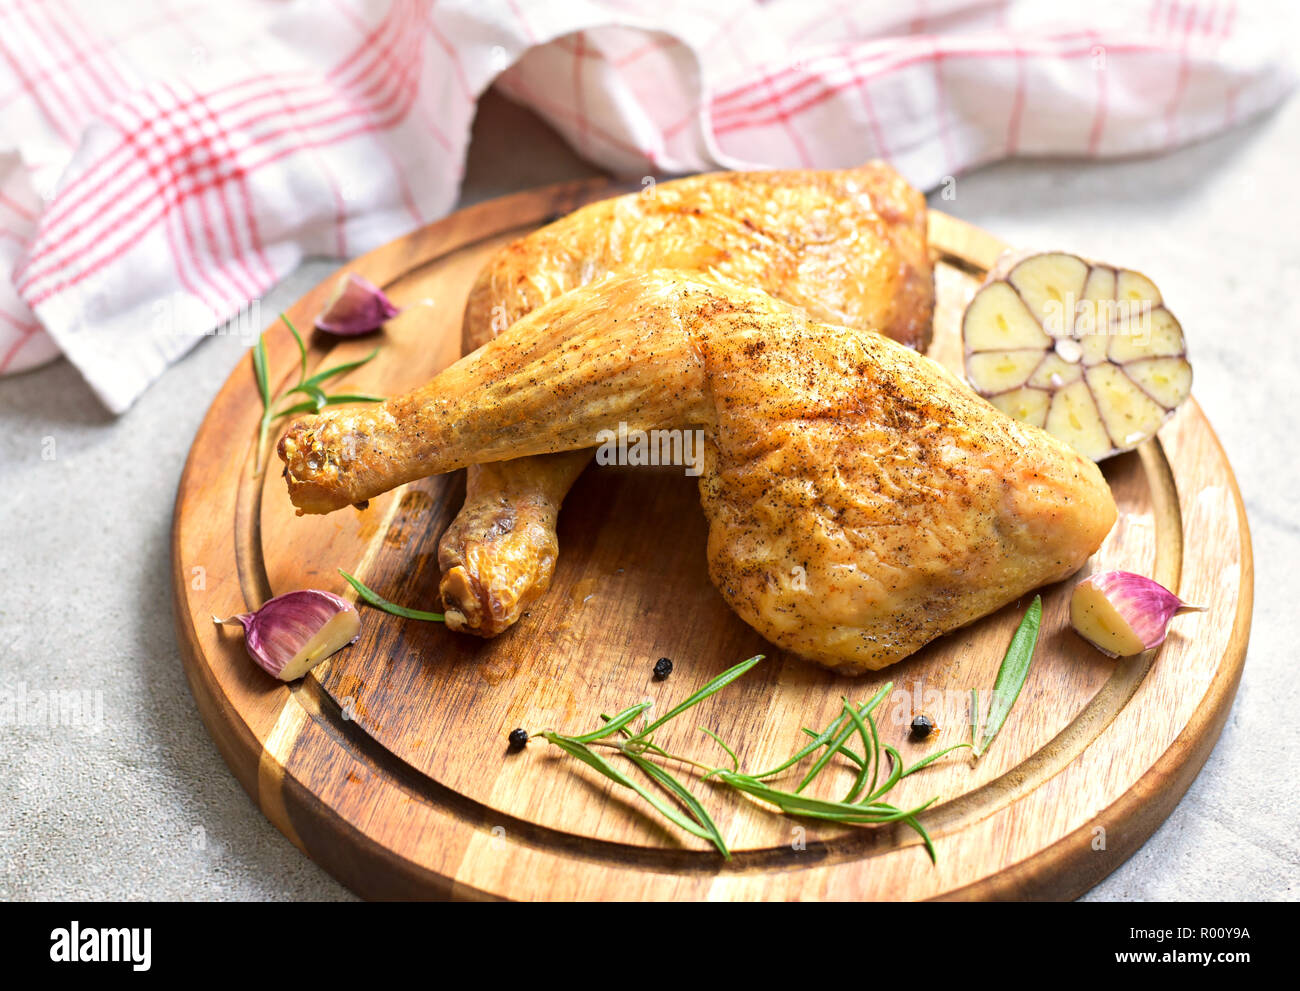 Delicious roast chicken leg or chicken drumsticks on a wooden cutting board. High angle view and fresh rosemary and garlic. Closeup shot, top view. Stock Photo